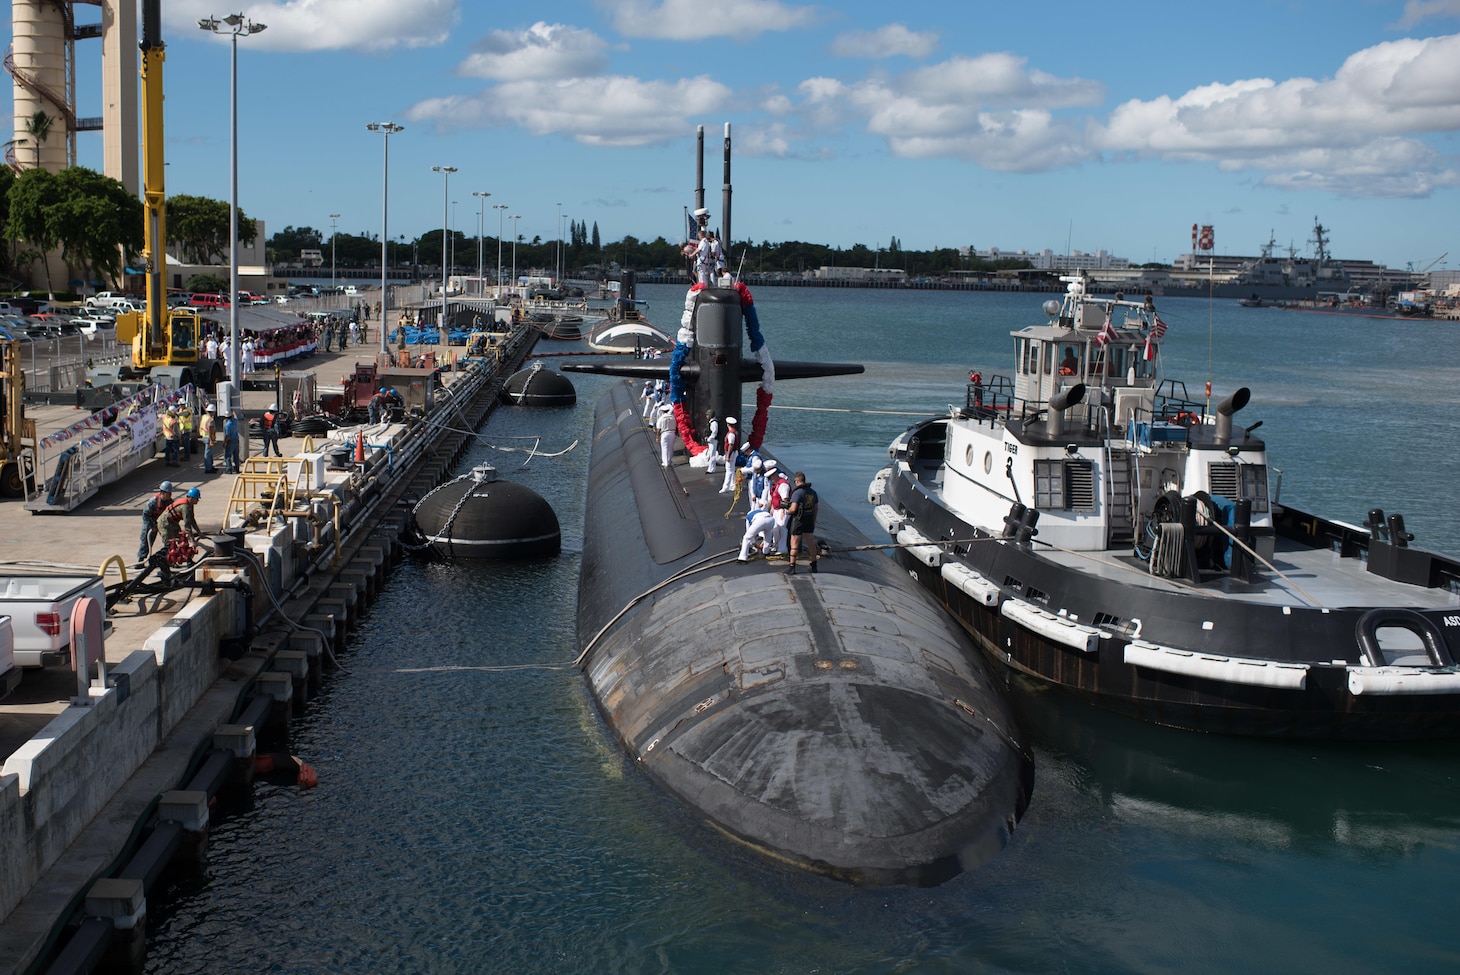 USS Chicago (SSN-721) makes its homecoming arrival at Joint Base Pearl Harbor-Hickam, after completing a change of homeport from Guam September 28, 2017.  (U.S. Navy photo by Mass Communication Specialist 1st Class Daniel Hinton)